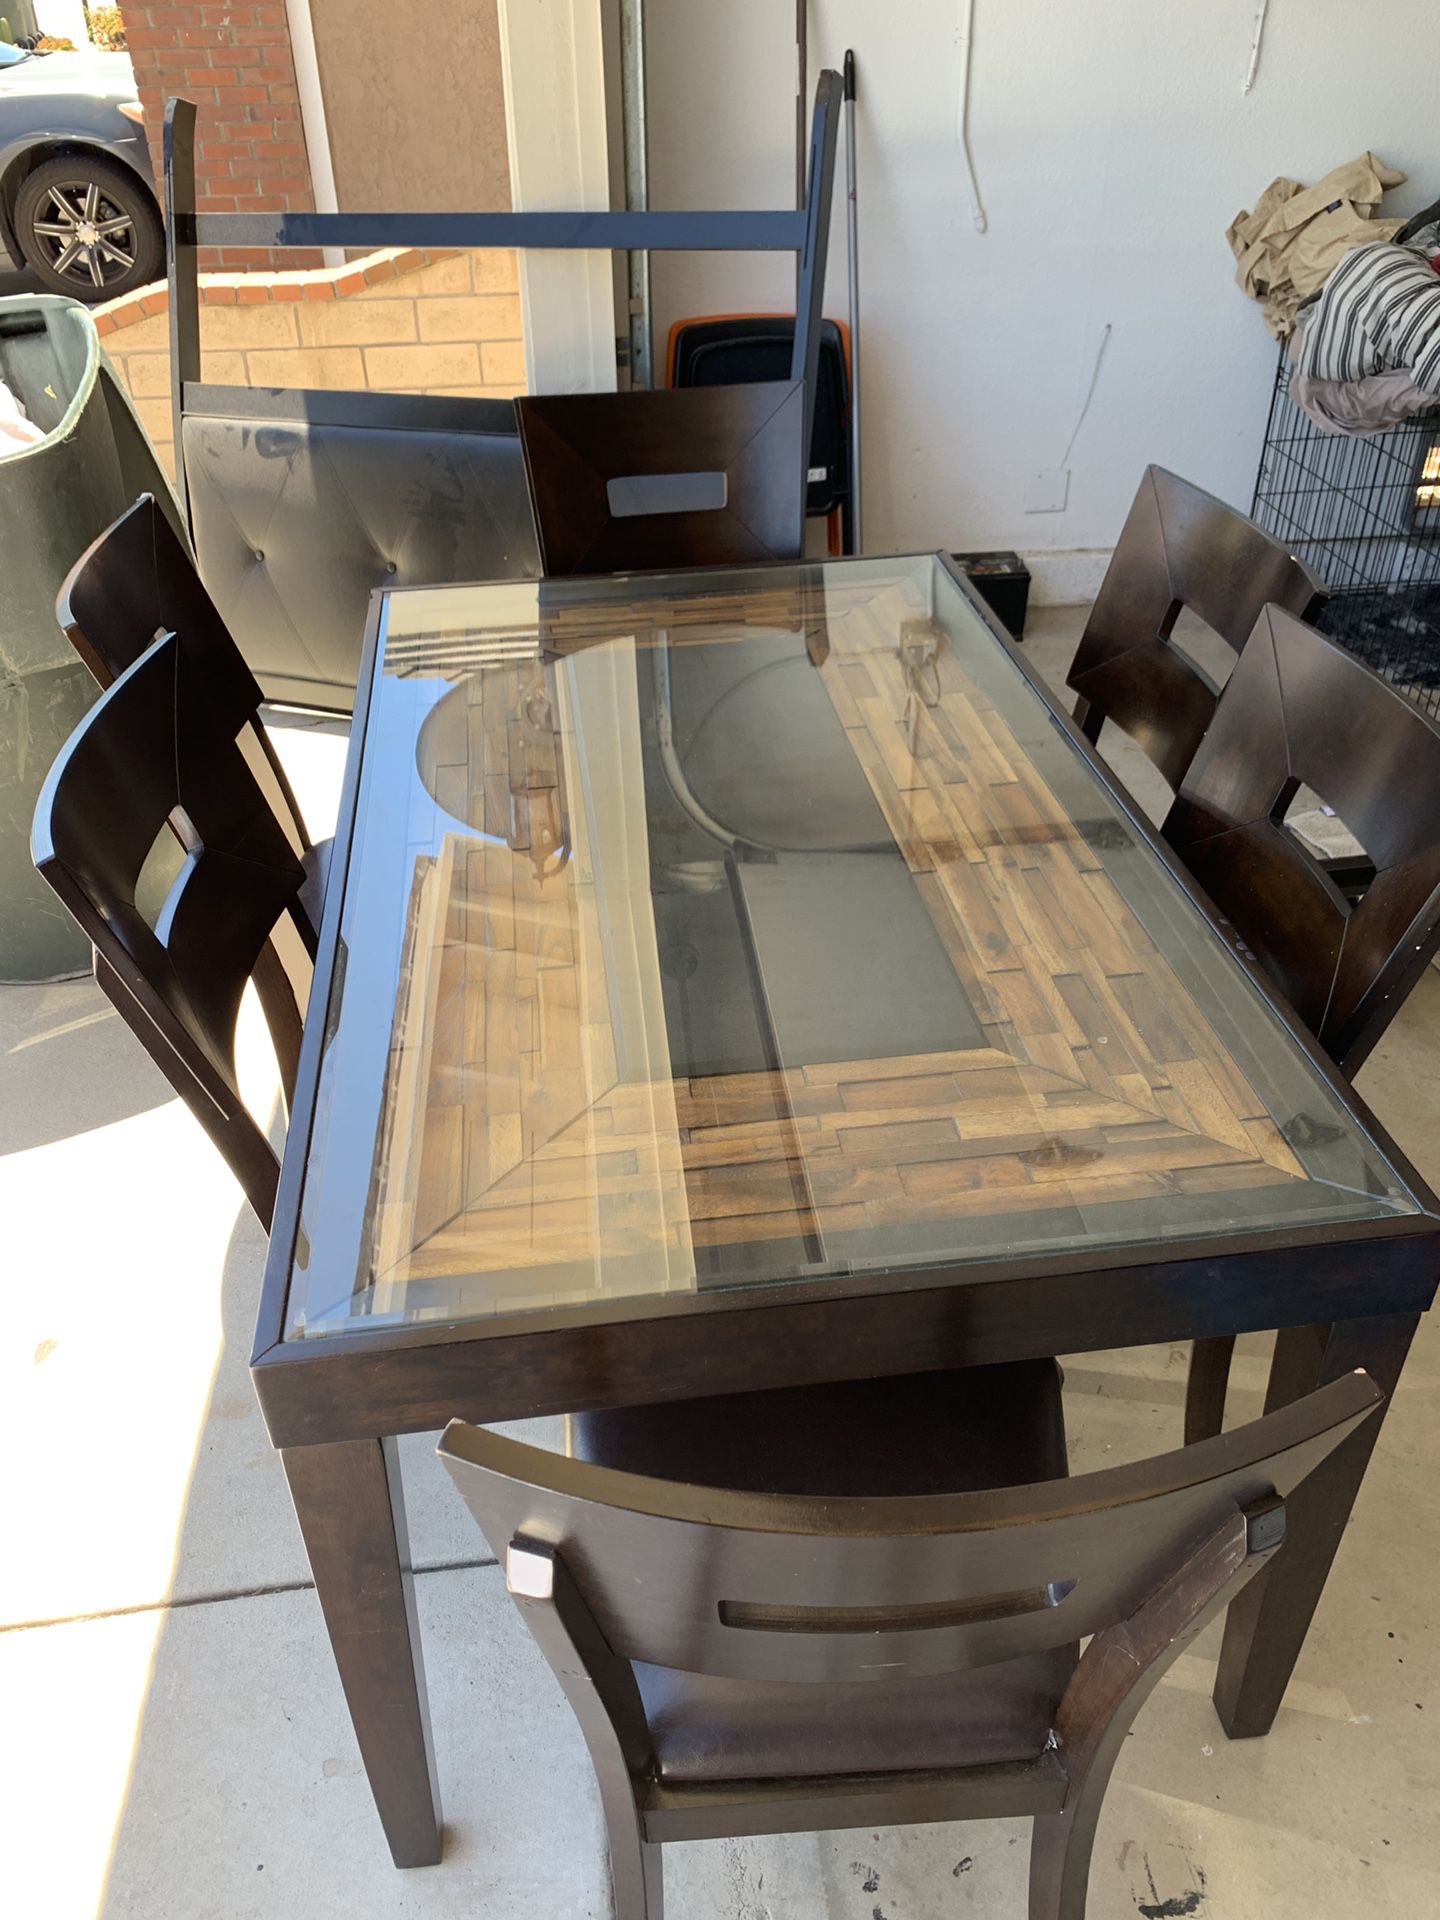 3’ x 5’ Dining Table, glass insert, and 6 chairs